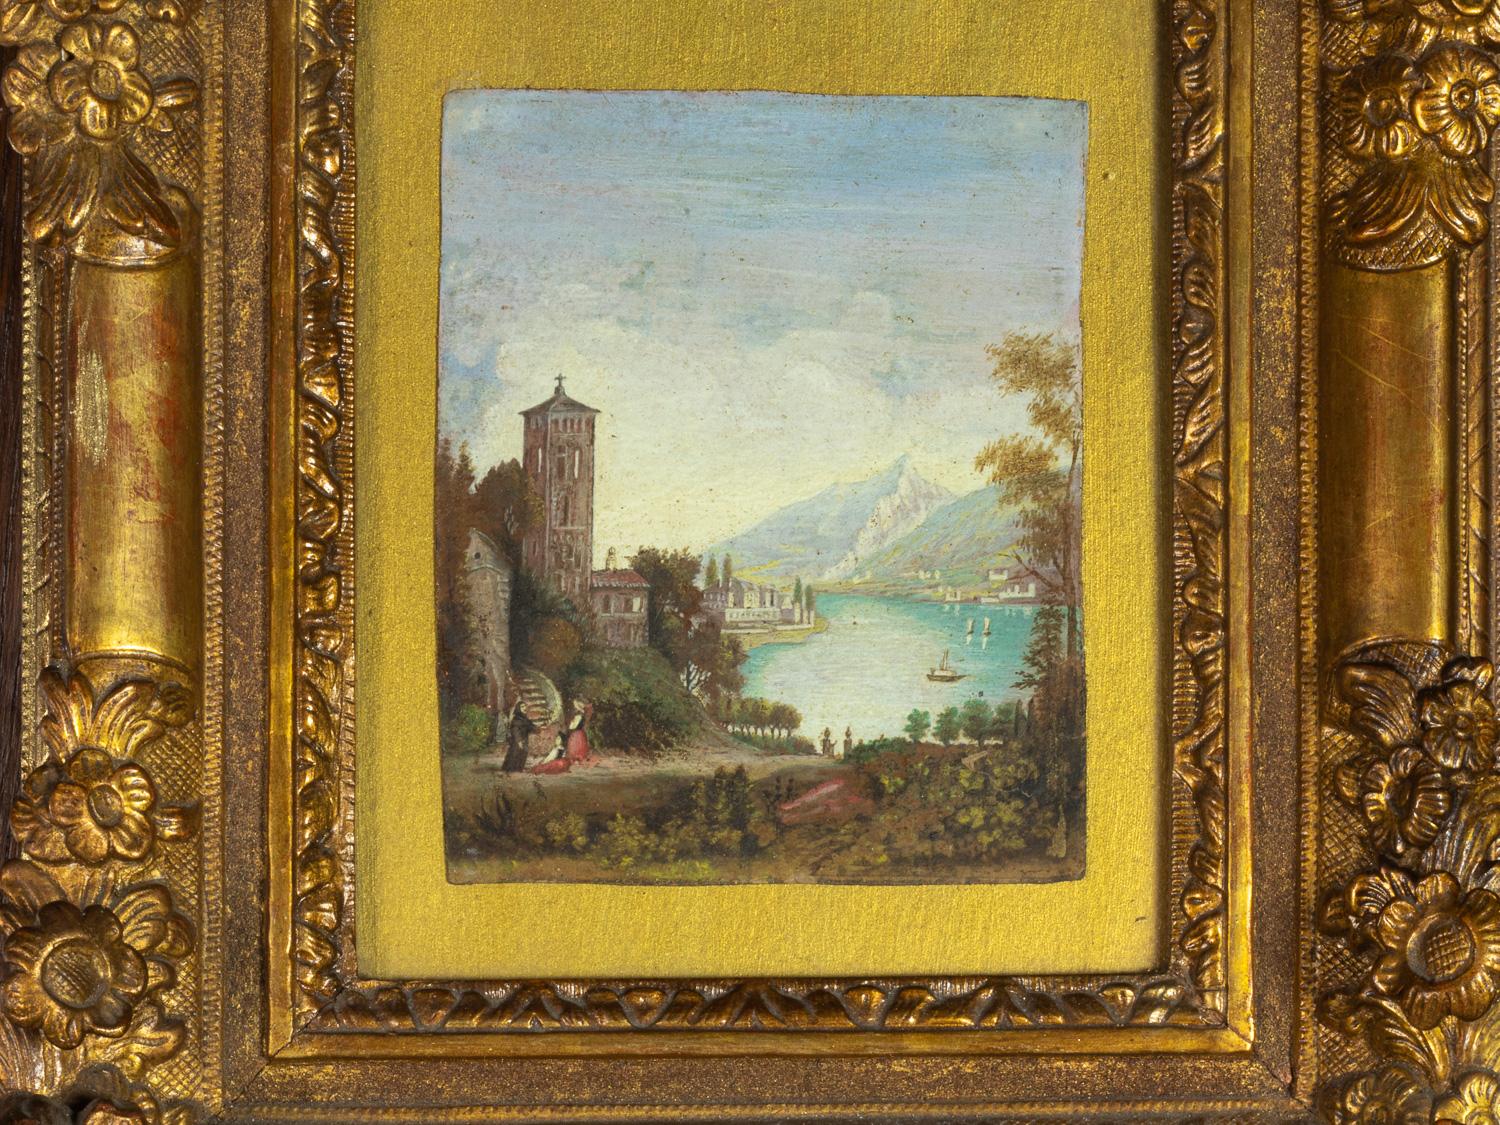 A grand view of an Italian lake, tower with the lake Garda (other name Benaco) and boats in the background.
An Italian School from XVIII Century.

Frame with glass.

Frame:
  Width: 12,2 in (31 cm) 
  Depth: 11 in (28 cm)
Paper:
  Width: 5,51 in (14